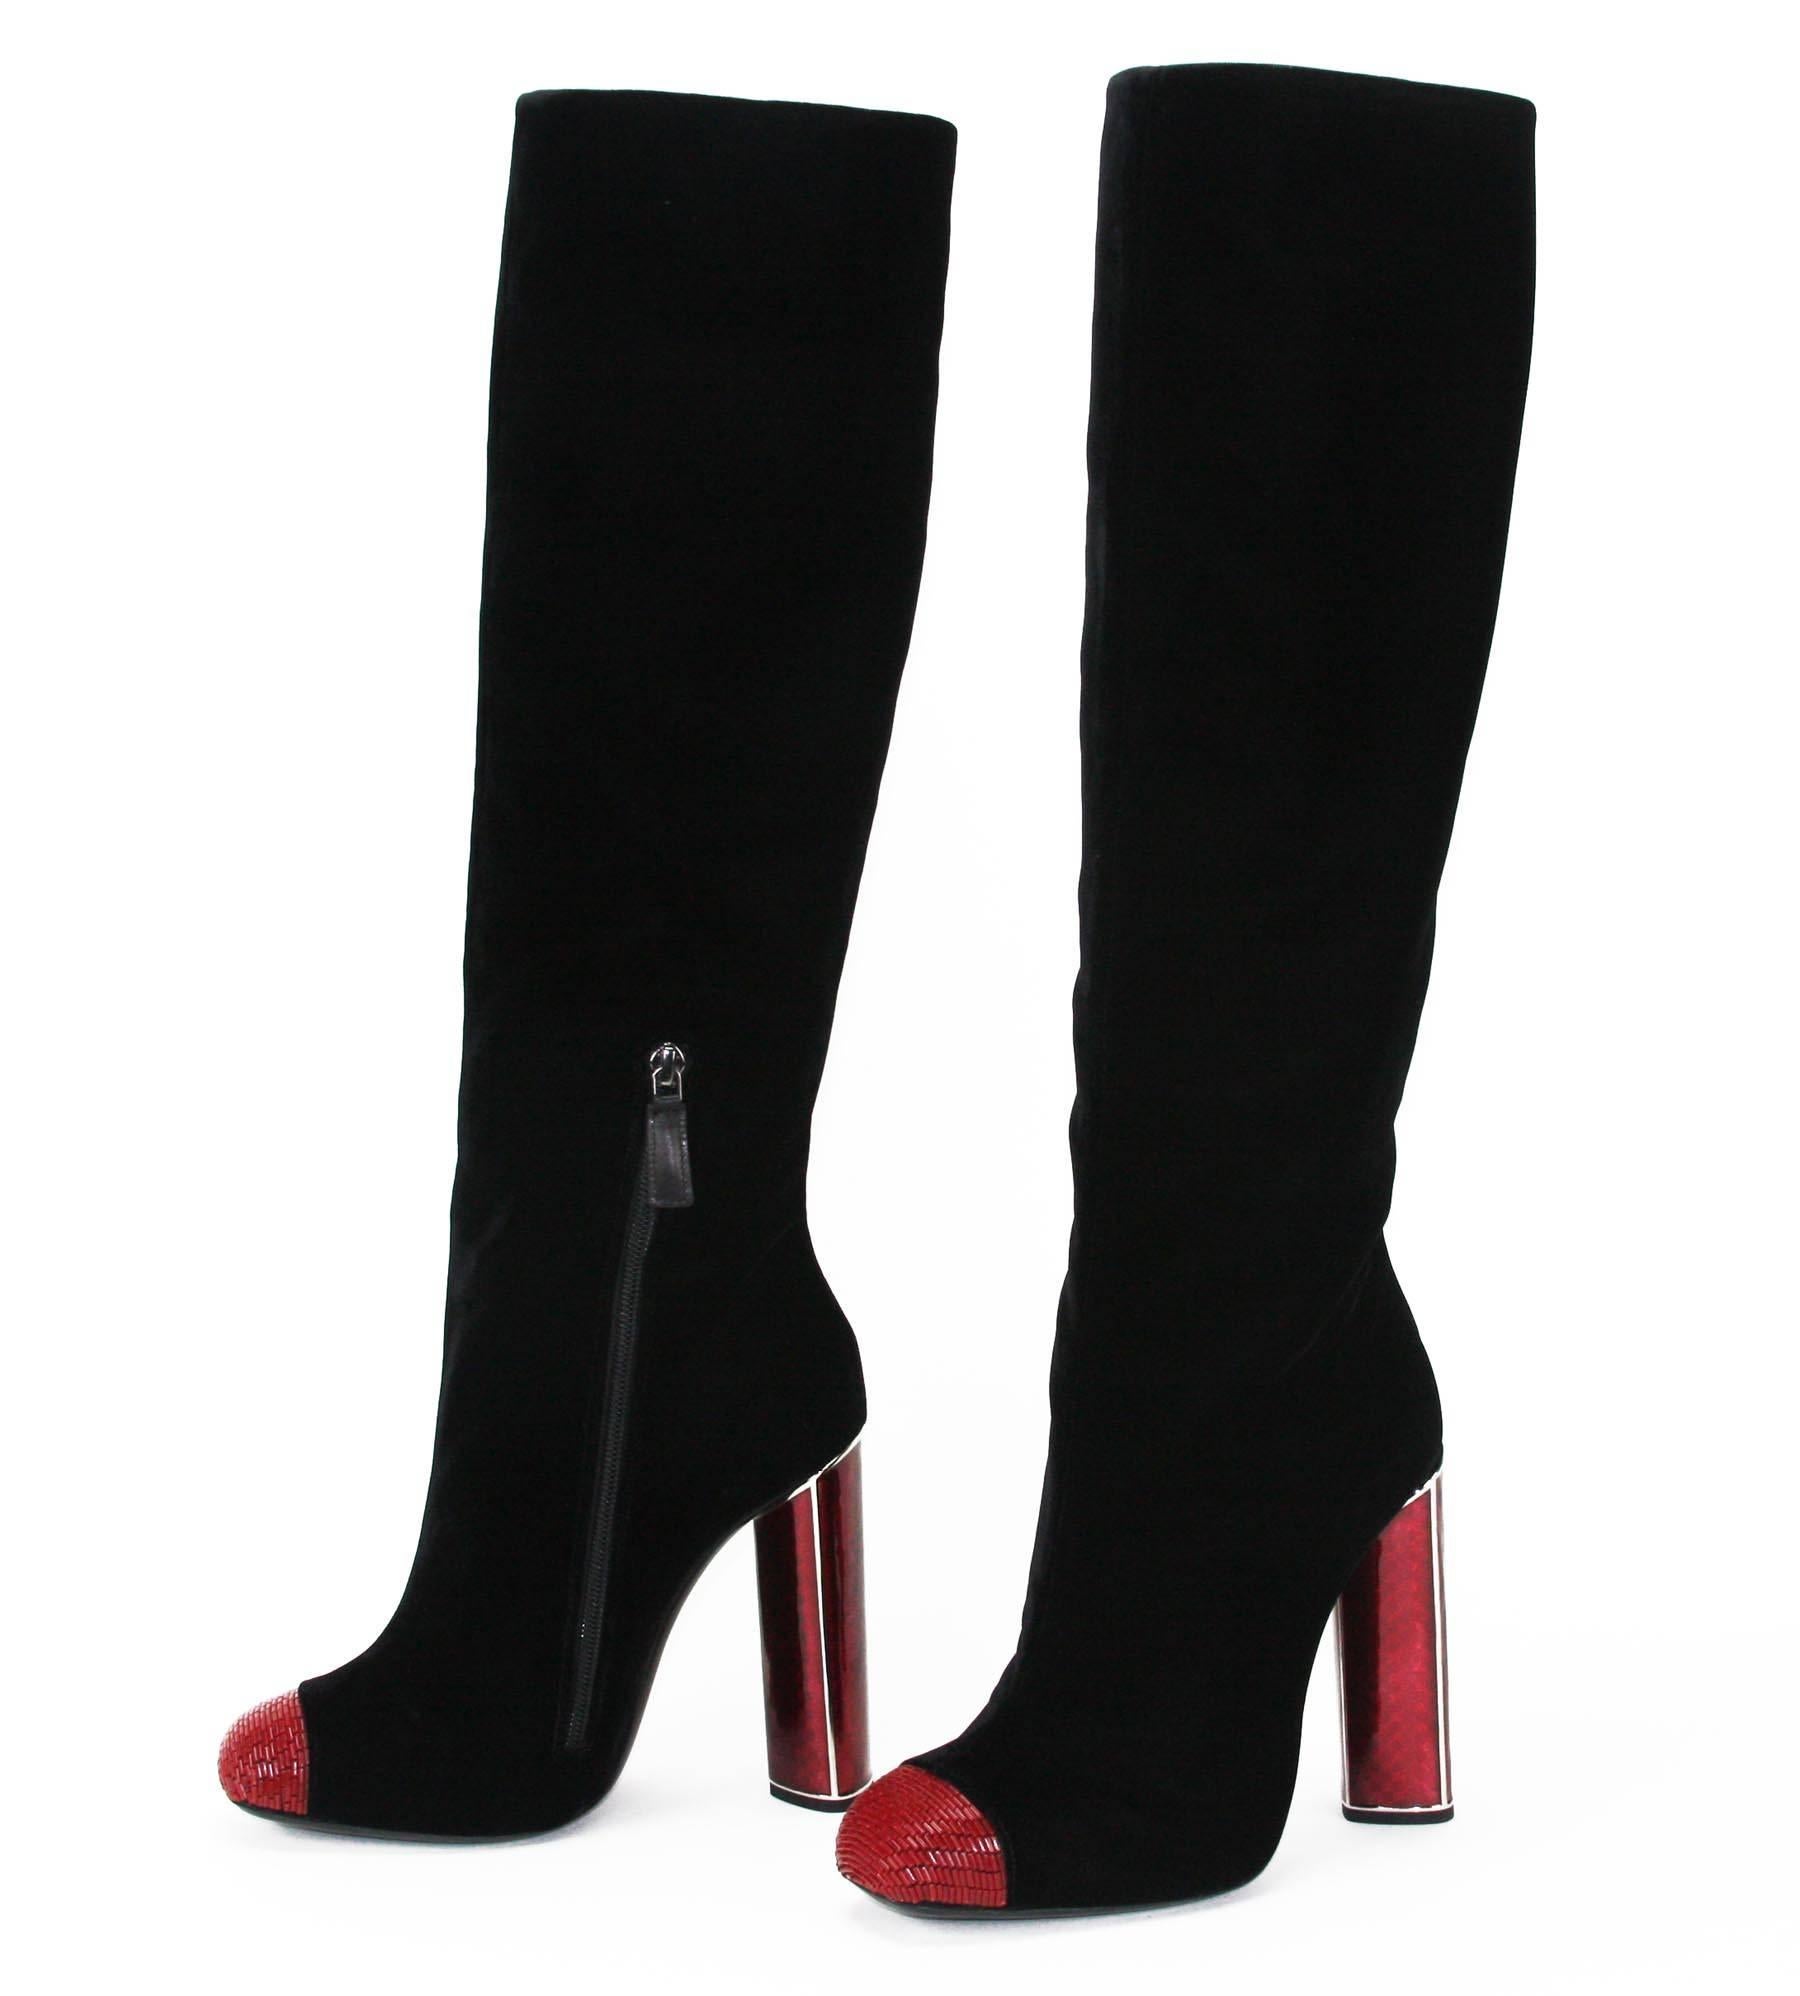 Luxury, glamour and sophistication are bywords for world-renowned designer TOM FORD.
Designer size - 39 ( US 9)
Midnight Black velvet, Ruby Red Bead Embellished Square Toe, Silver-trimmed Heel 4.25 inches, Partial Zipper Along Side.
Made in